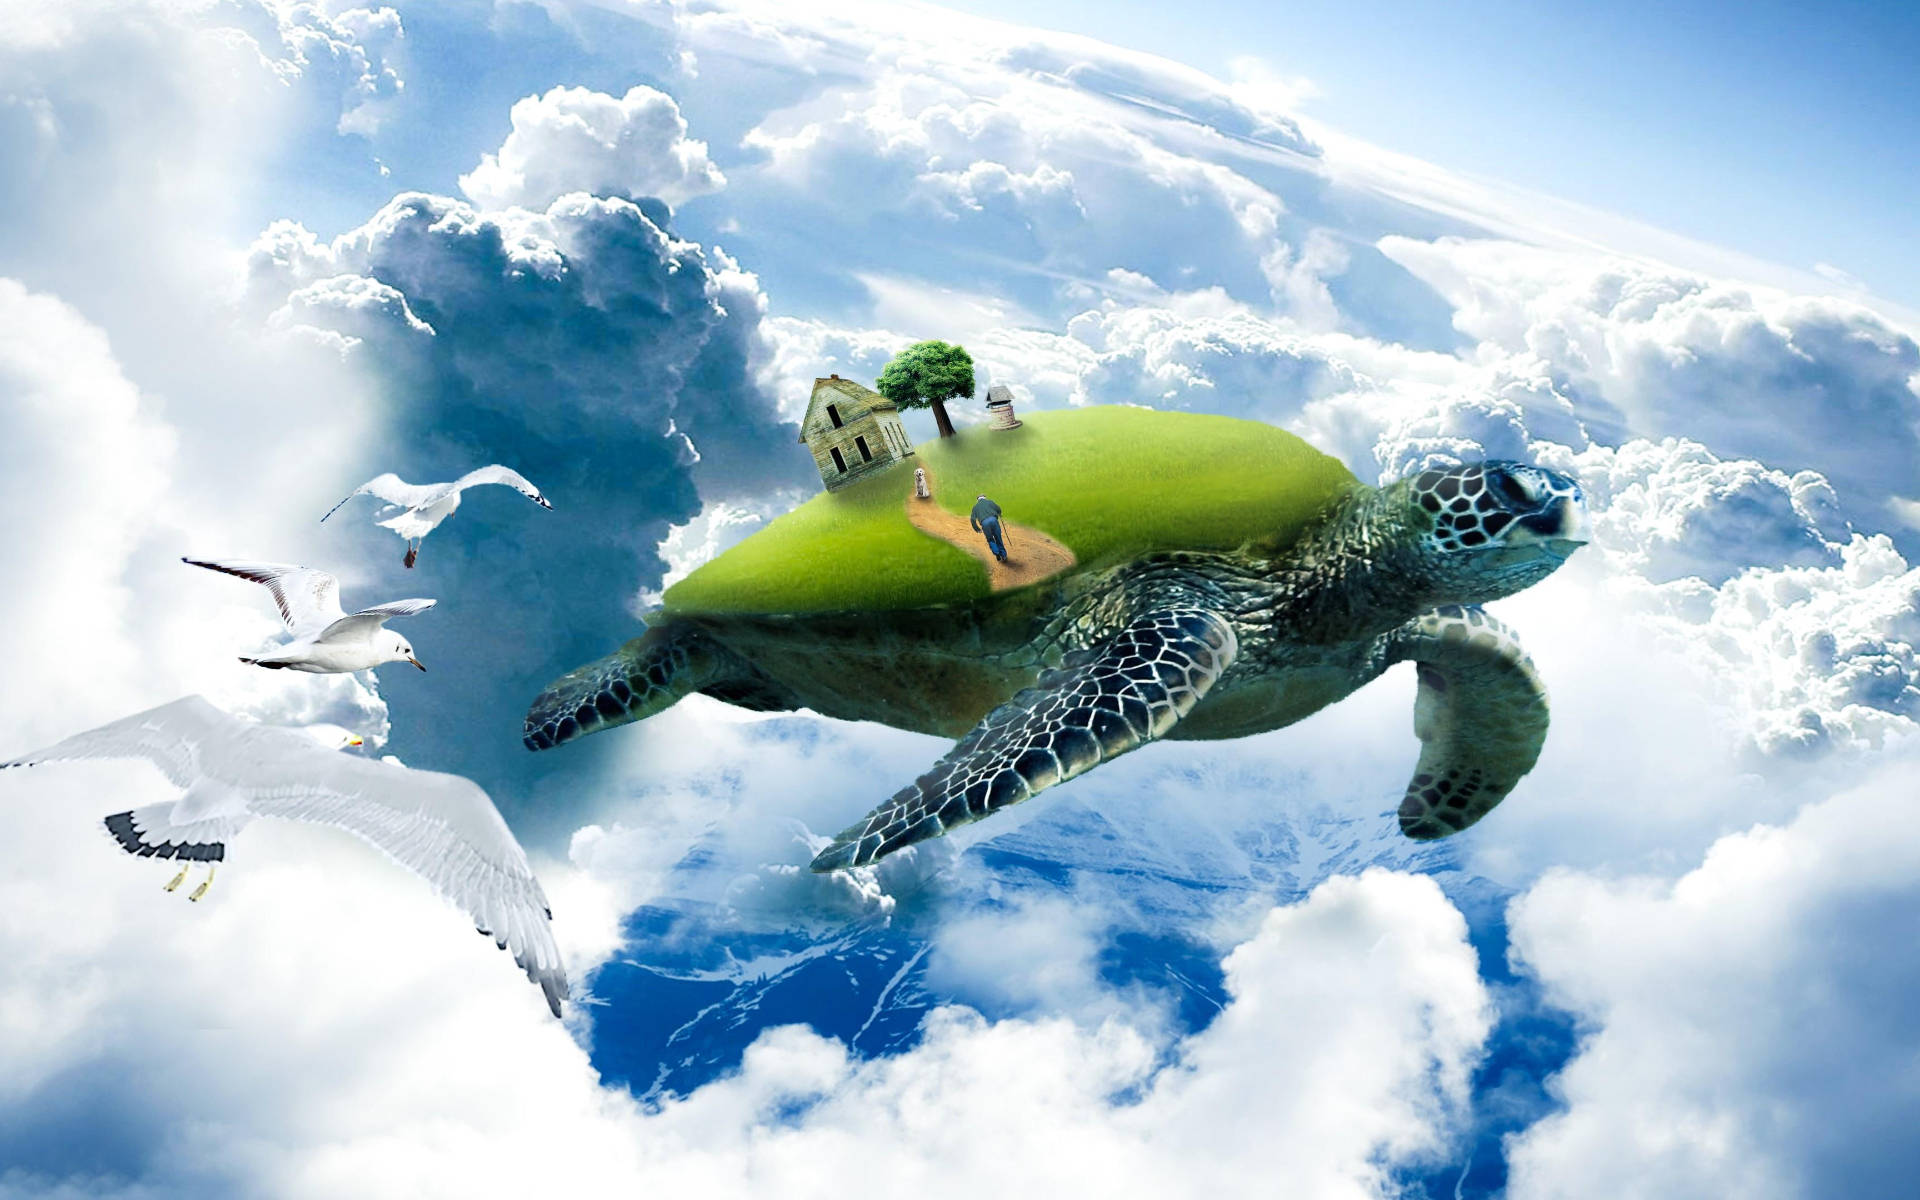 Cool Turtle Flying Above Clouds